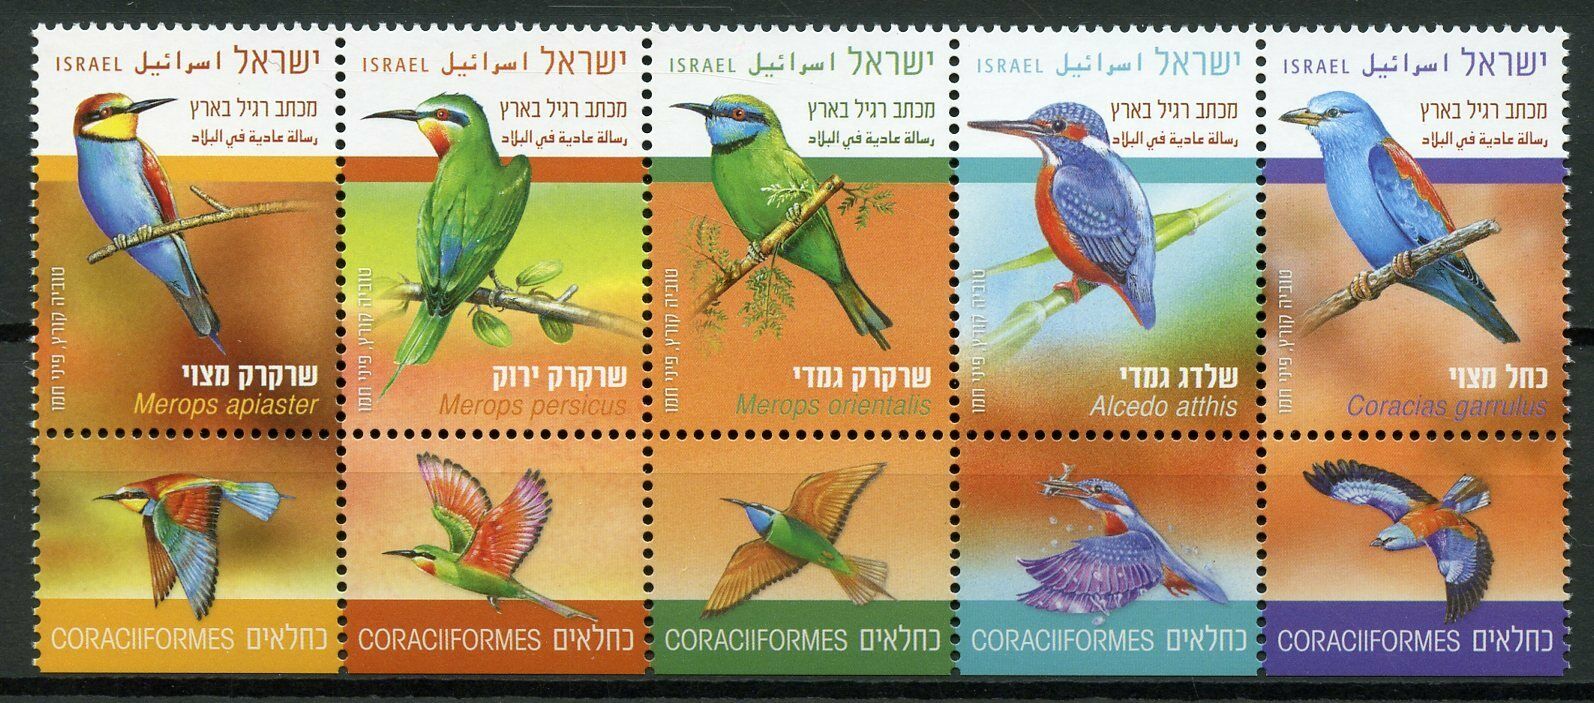 Israel Birds on Stamps 2019 MNH Kingfishers Bee-Eaters Rollers 5v Strip